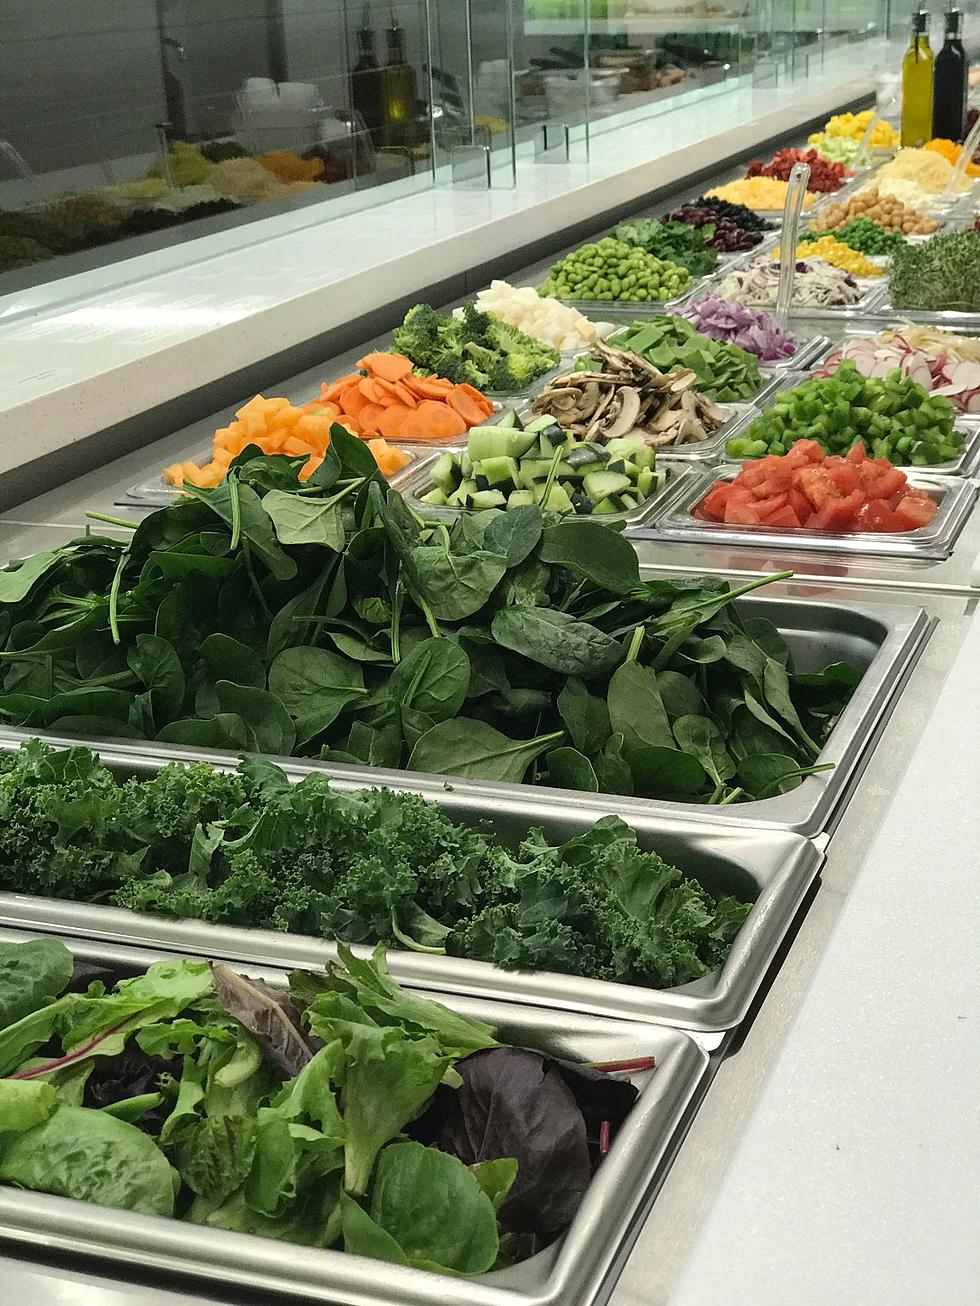 Looking For A Good Salad Bar? Lubbock Might Be Getting One Soon